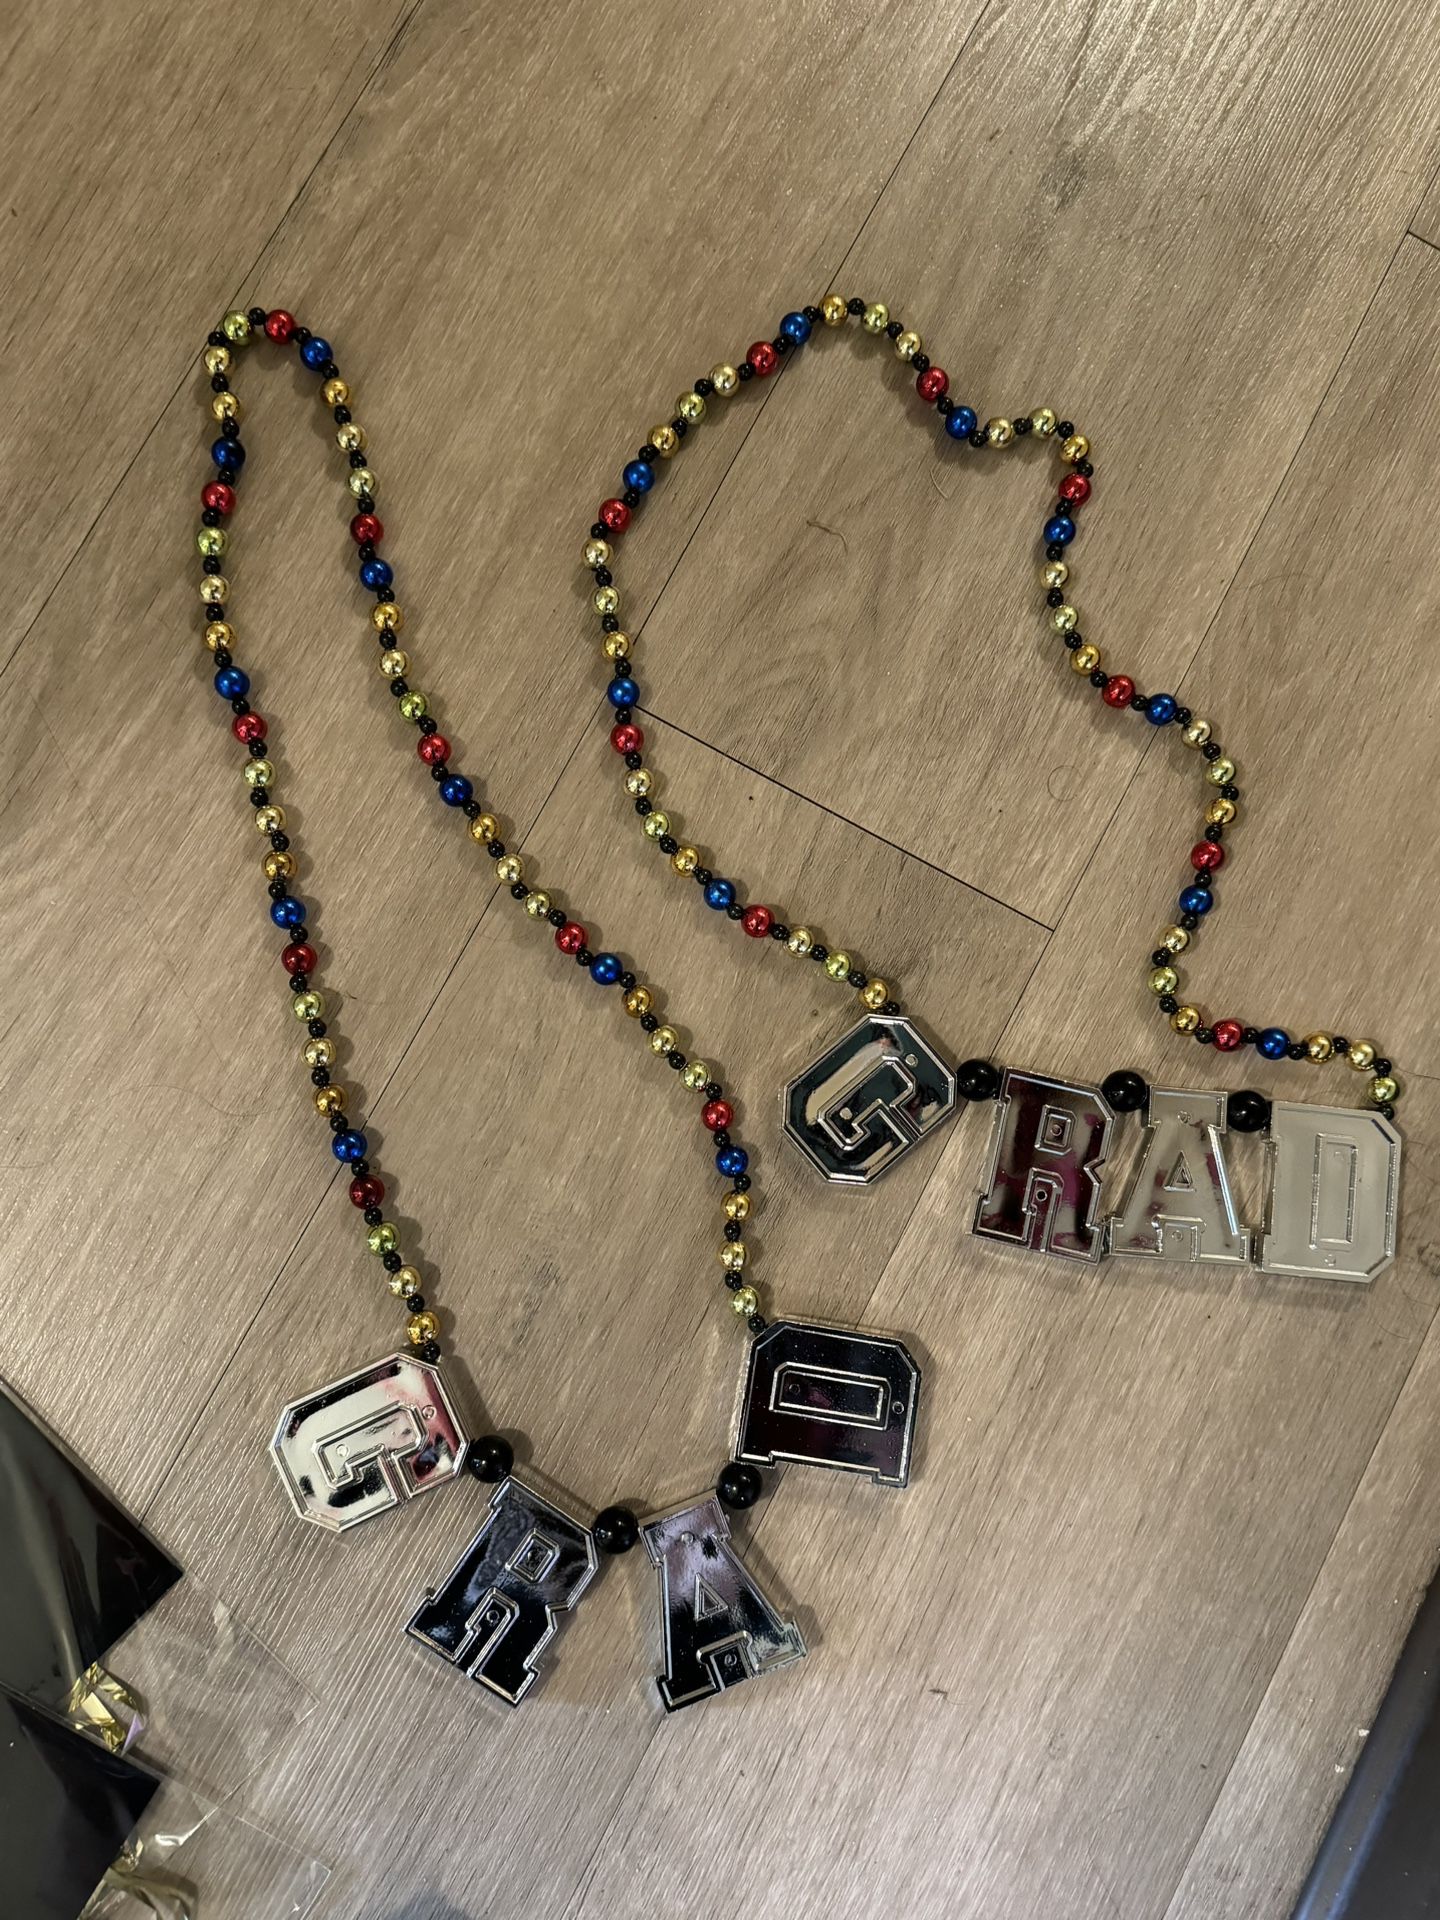 🧑‍🎓 Graduation 👩‍🎓 Necklaces Brand New $10 Each / Thick Material / Nice 😊 